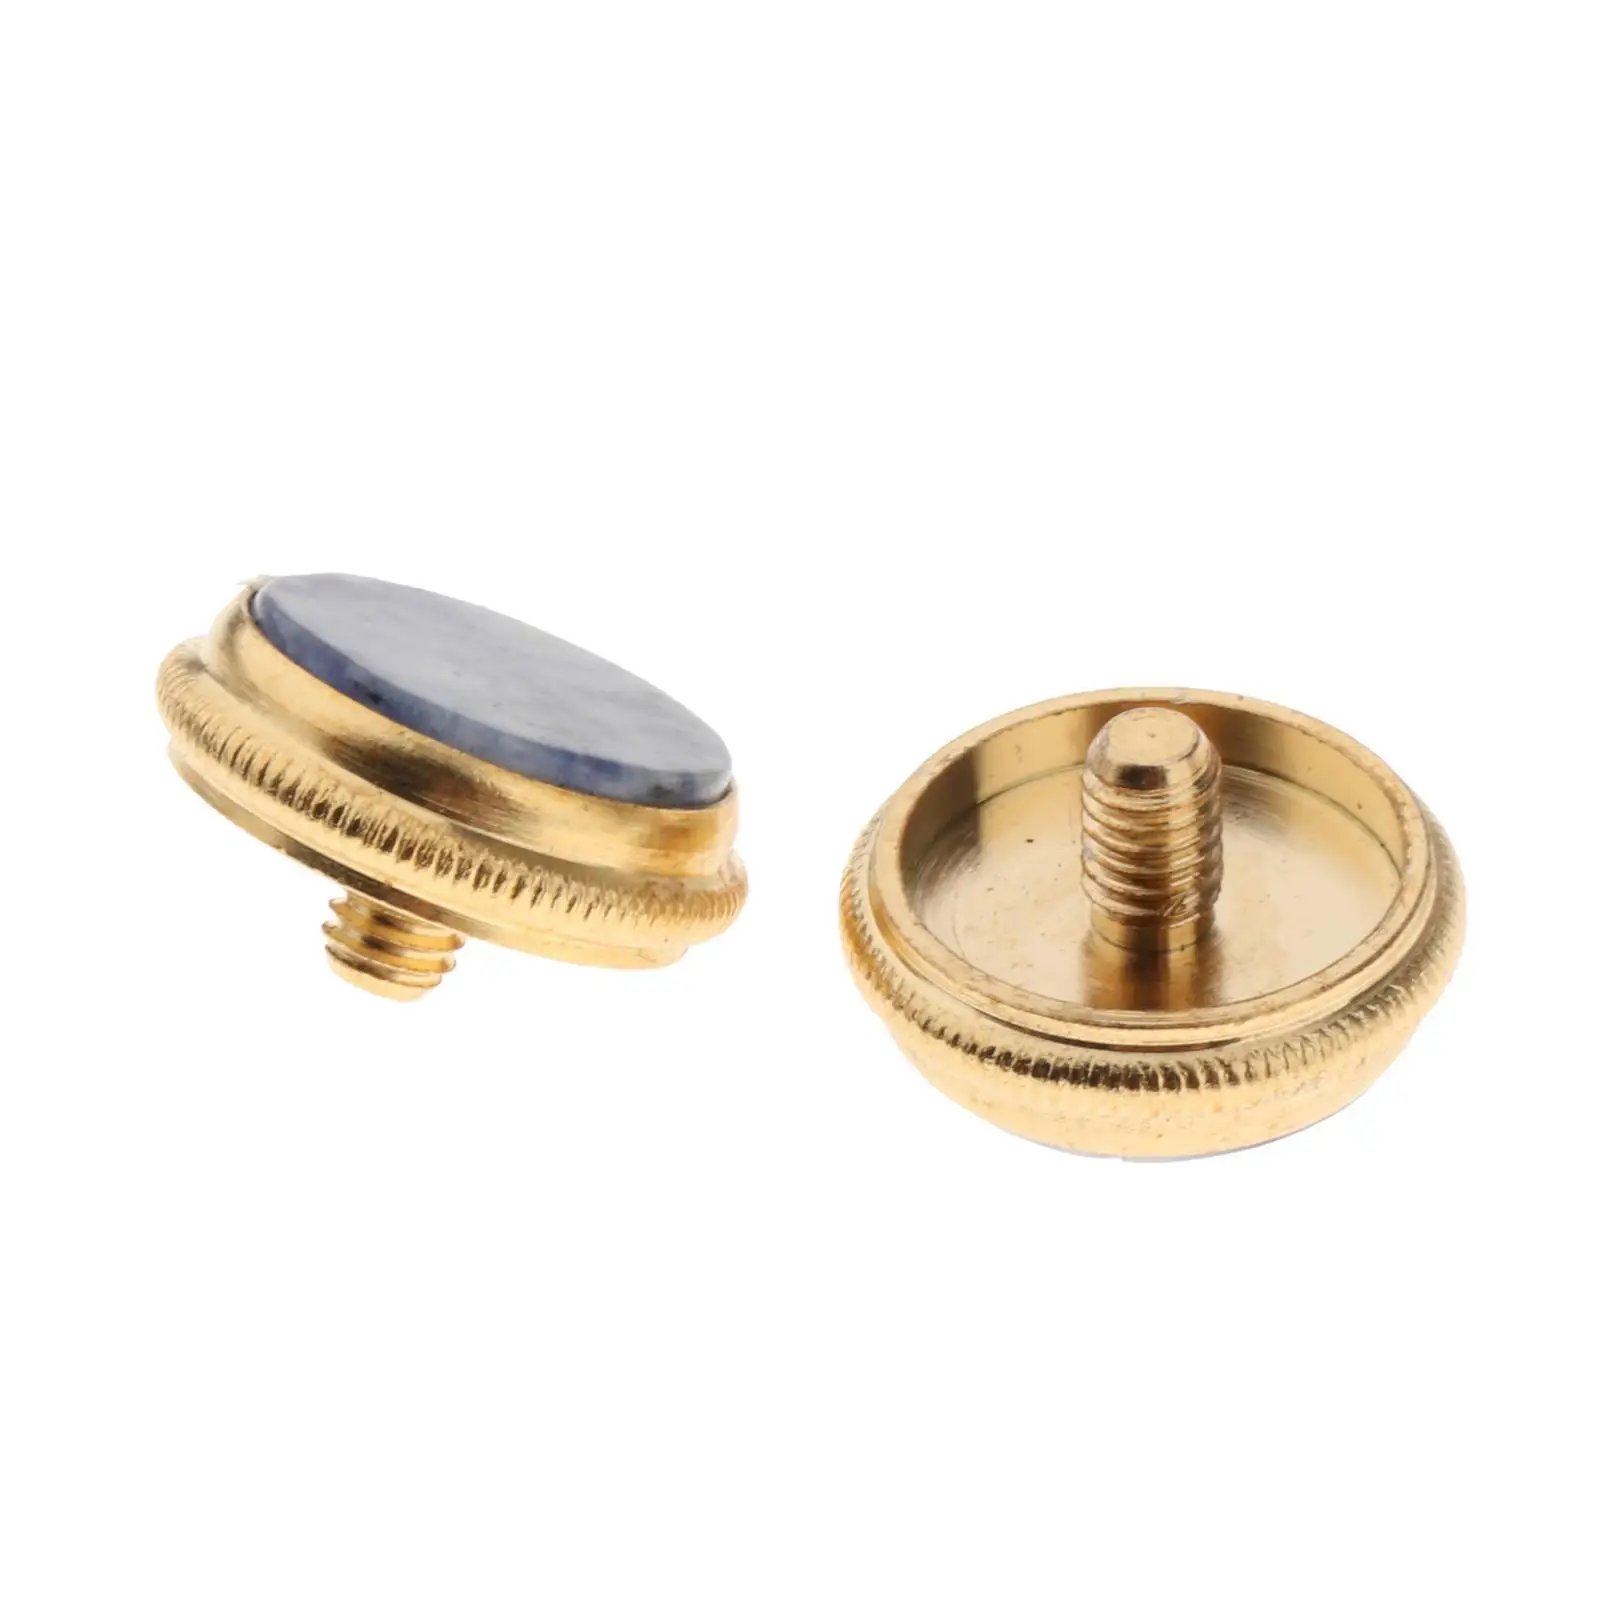 2x Trumpet Finger Buttons Cover for Musical Instrument Trumpet 